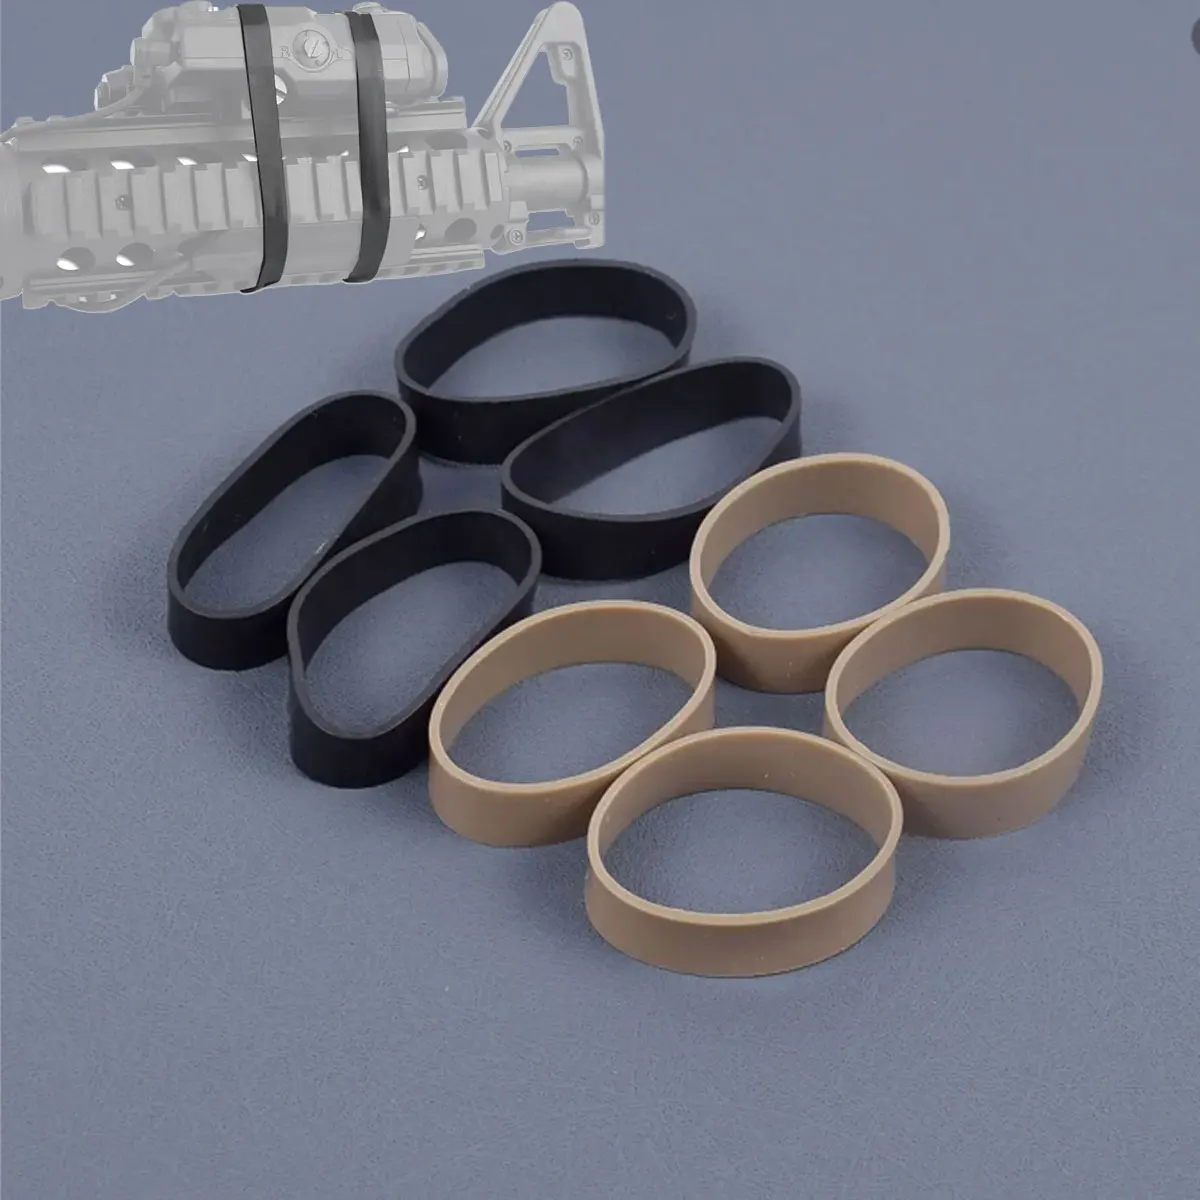 Tactical Airsoft High Strength Elastic Rubber Ring Hunting Rilfe Rubber Band For DBAL A2 PEQ15 Flashlight Laser Sight 4pcs/lot